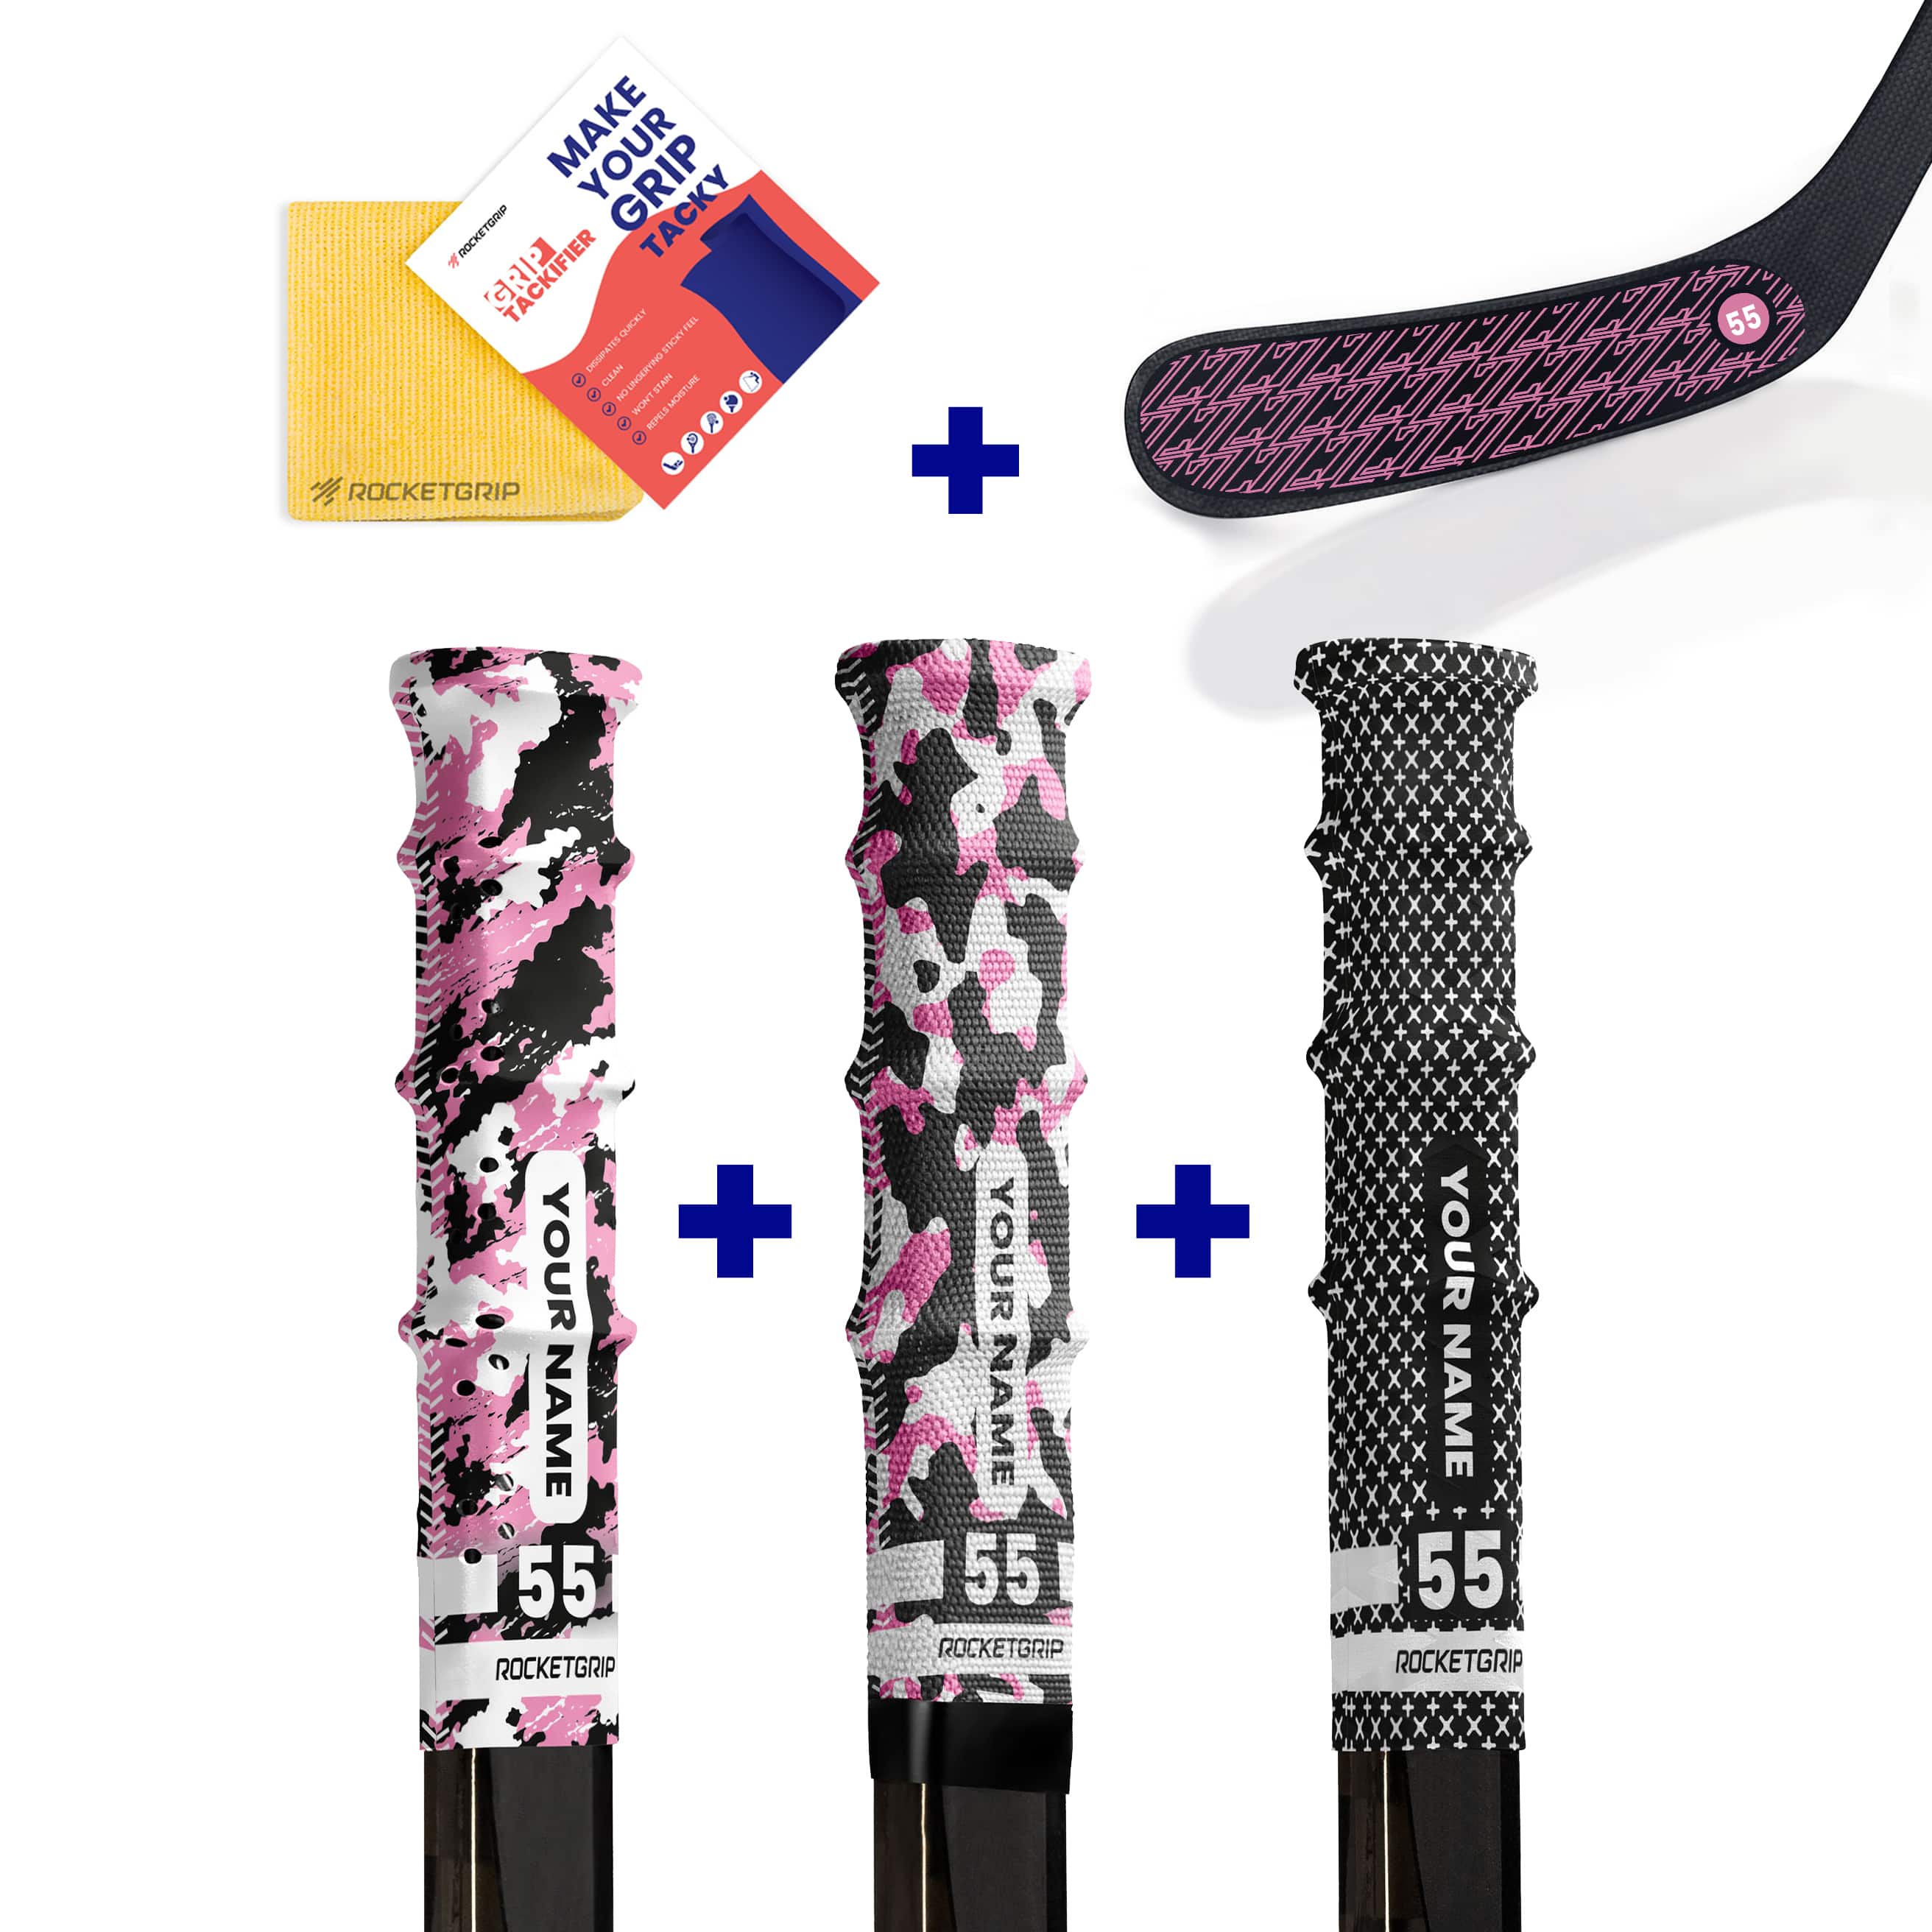 Ultimate-Pack Camo Hockey Grips